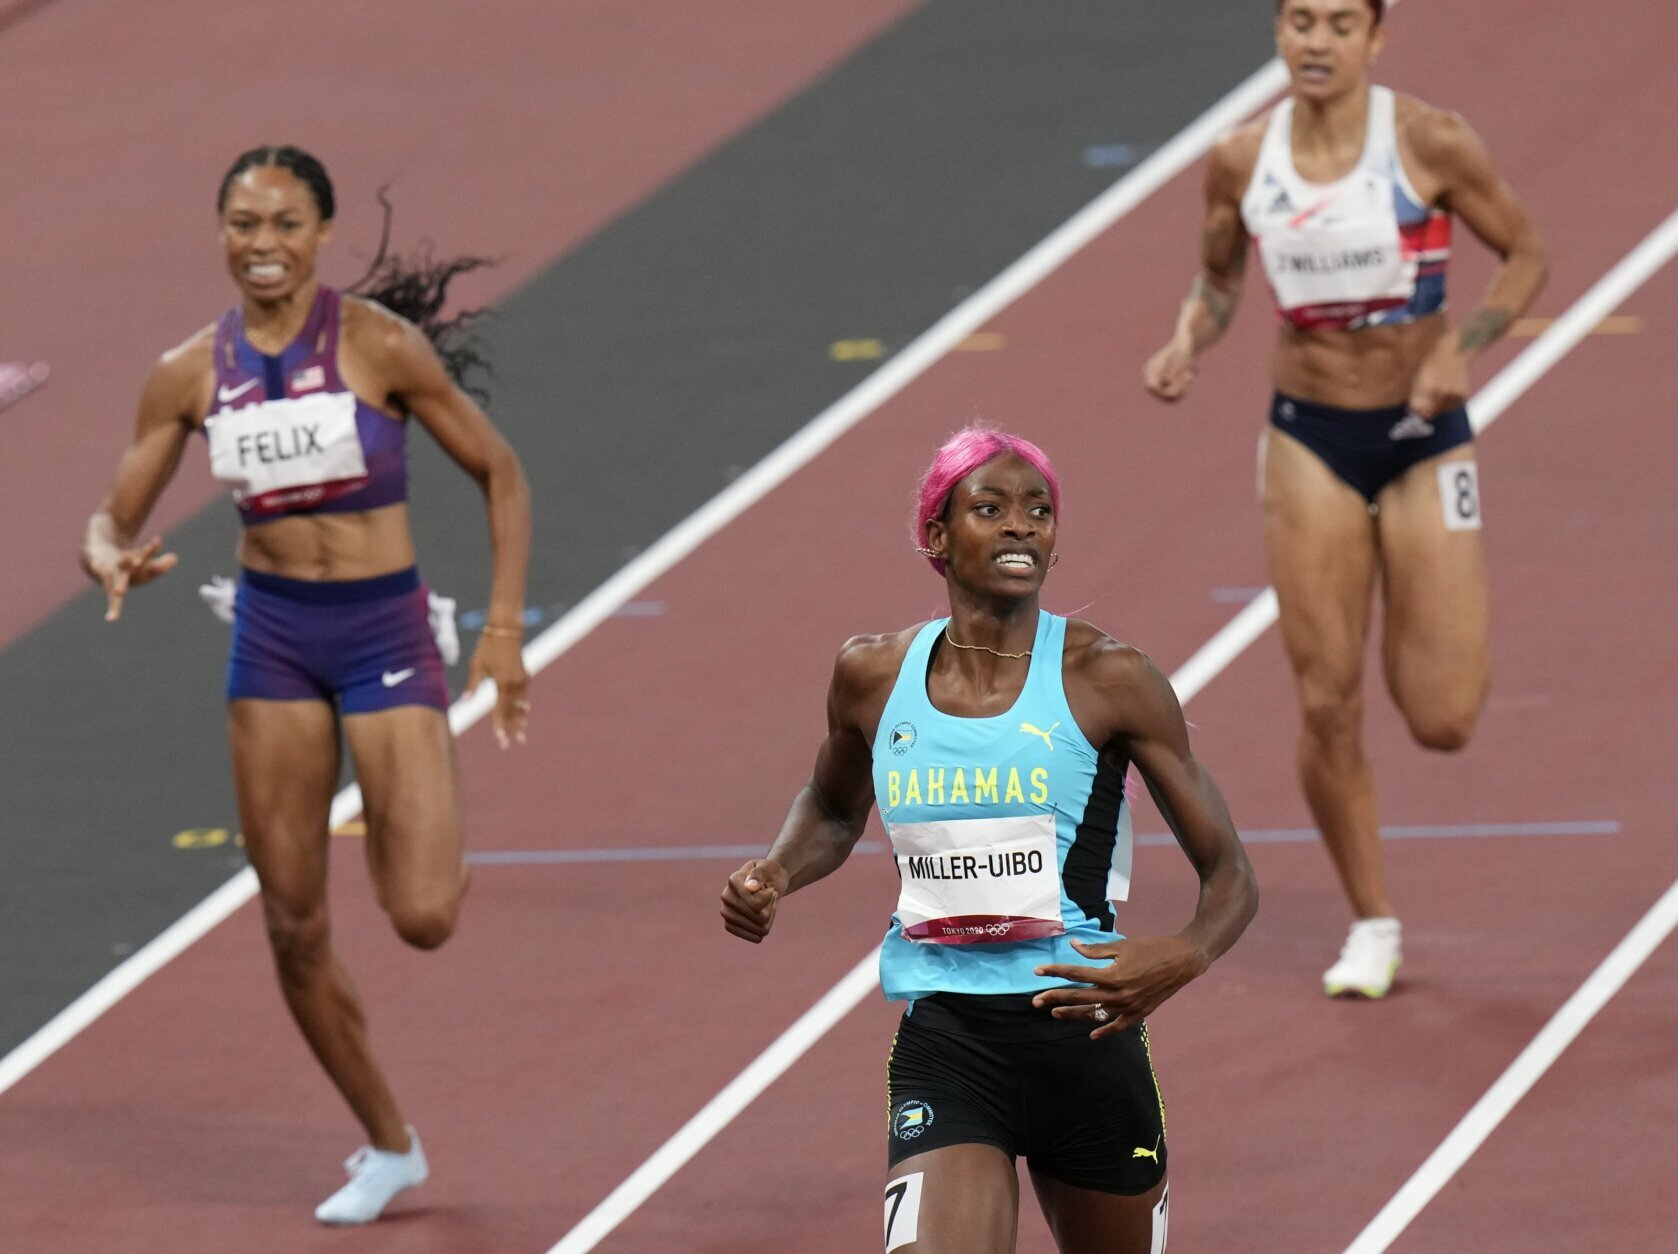 Shaunae Miller-Uibo, of Bahamas crosses the line to win the gold medal ahead of Allyson Felix, of United States, bronze, in the final of women's 400-meters at the 2020 Summer Olympics, Friday, Aug. 6, 2021, in Tokyo, Japan. (AP Photo/Francisco Seco)